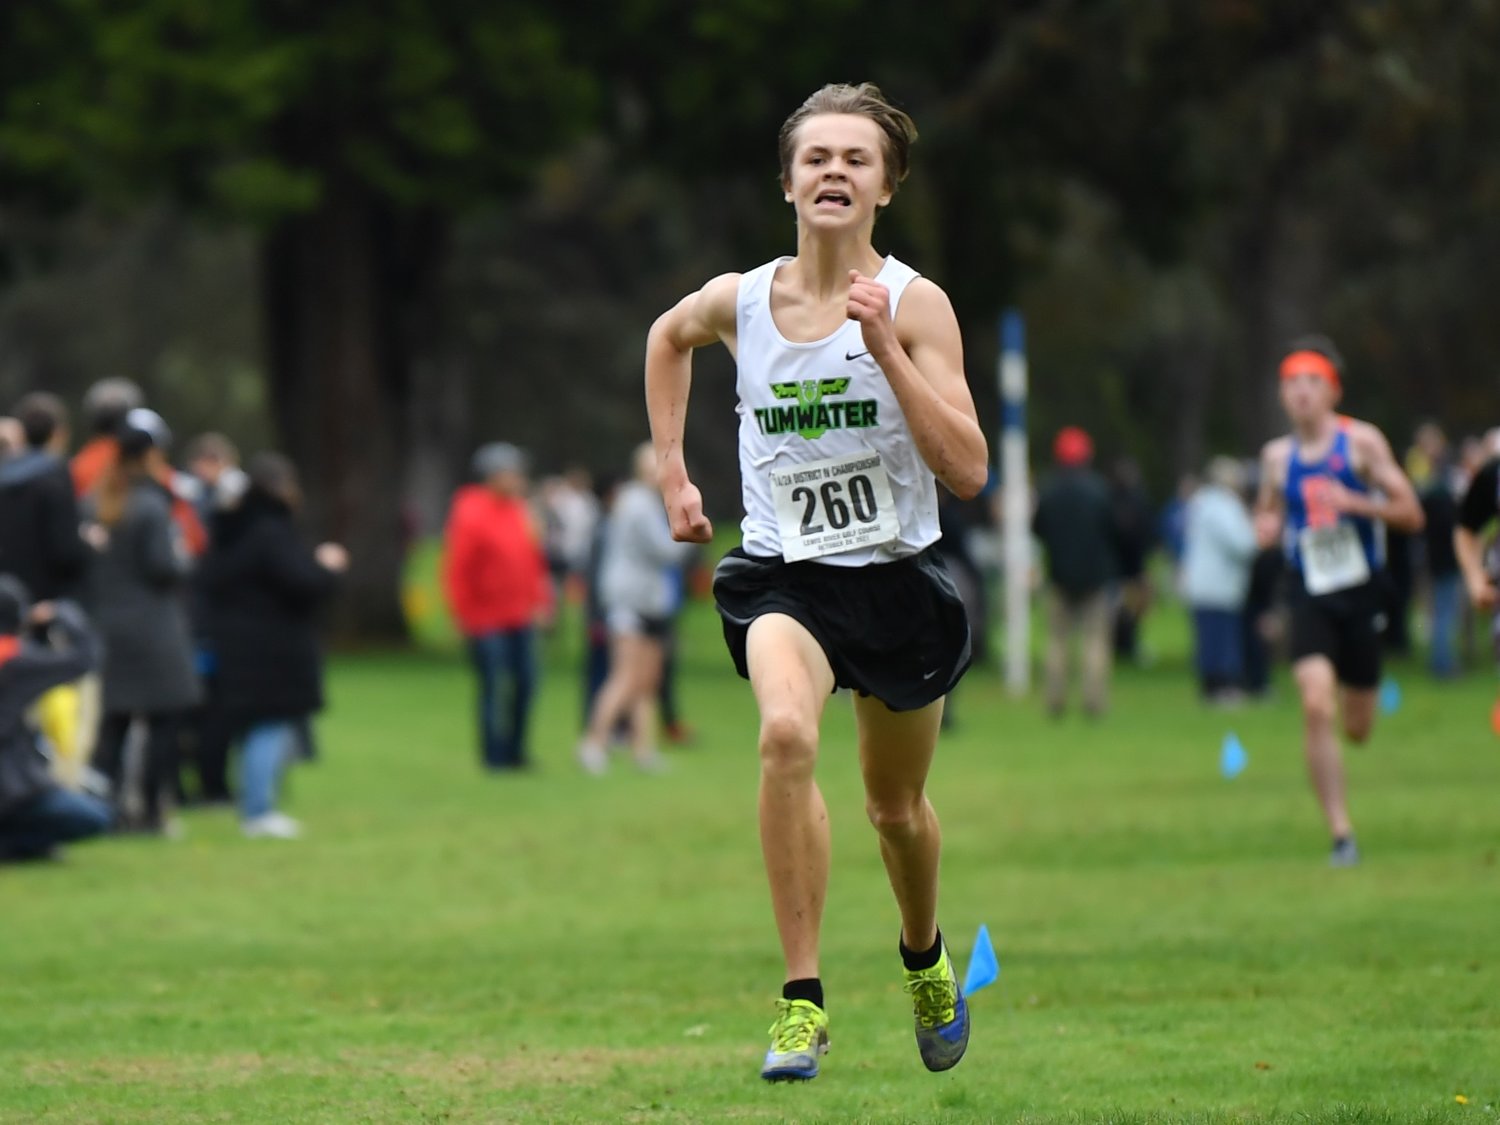 Tumwater sophomore Brenden Hamilton crosses the finish line at the District 4 Cross Country Championships Oct. 28. Hamilton qualified for his first state meet next Saturday.